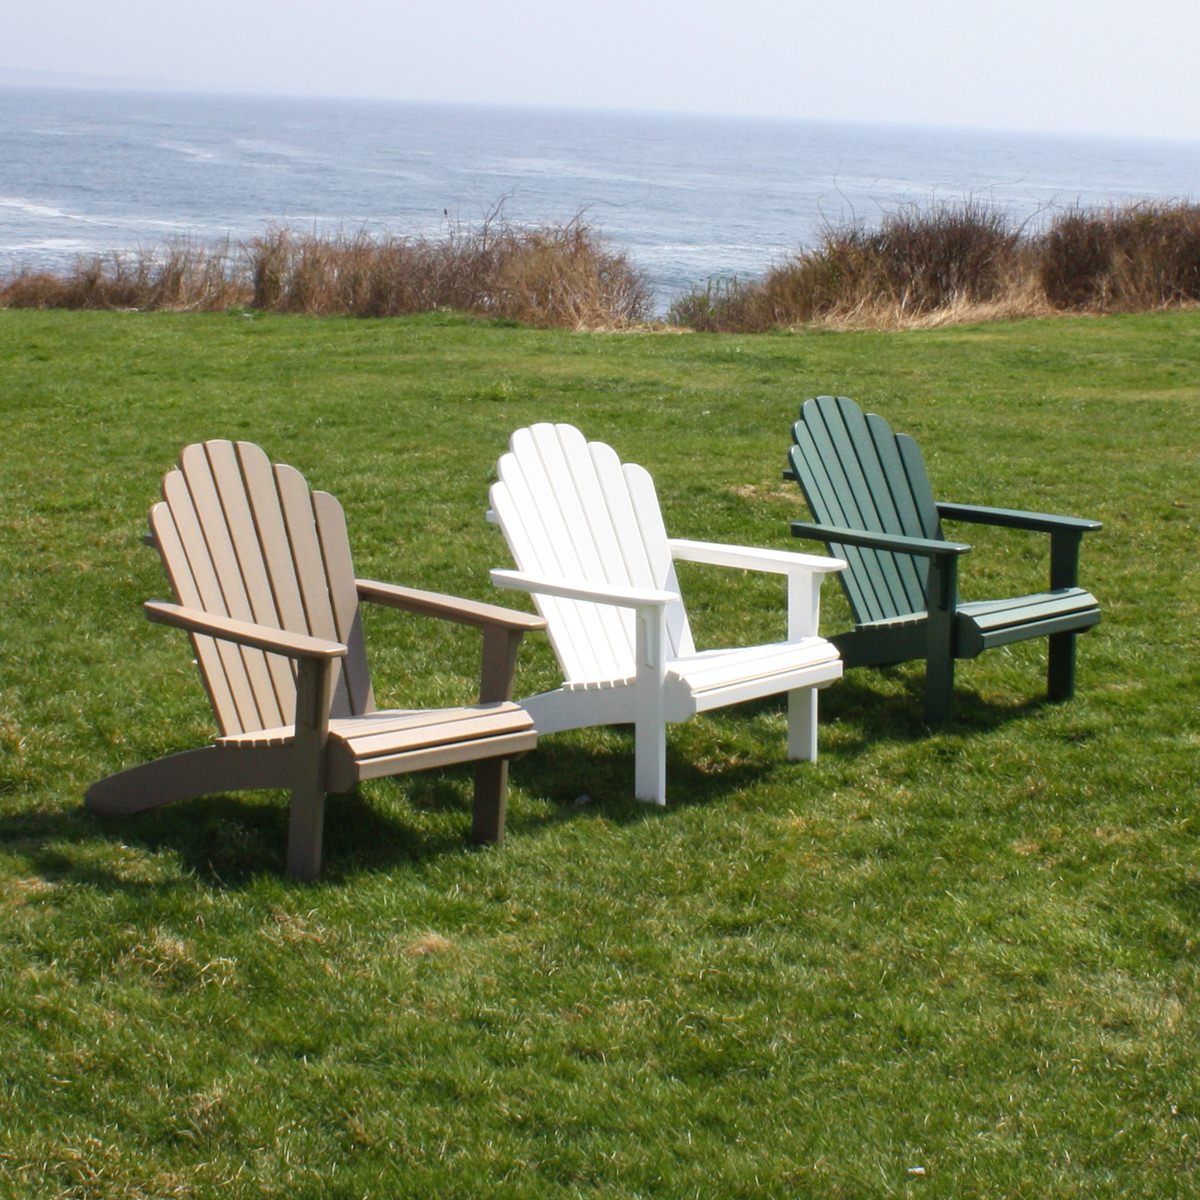 Albums 104+ Pictures Pictures Of Adirondack Chairs Completed